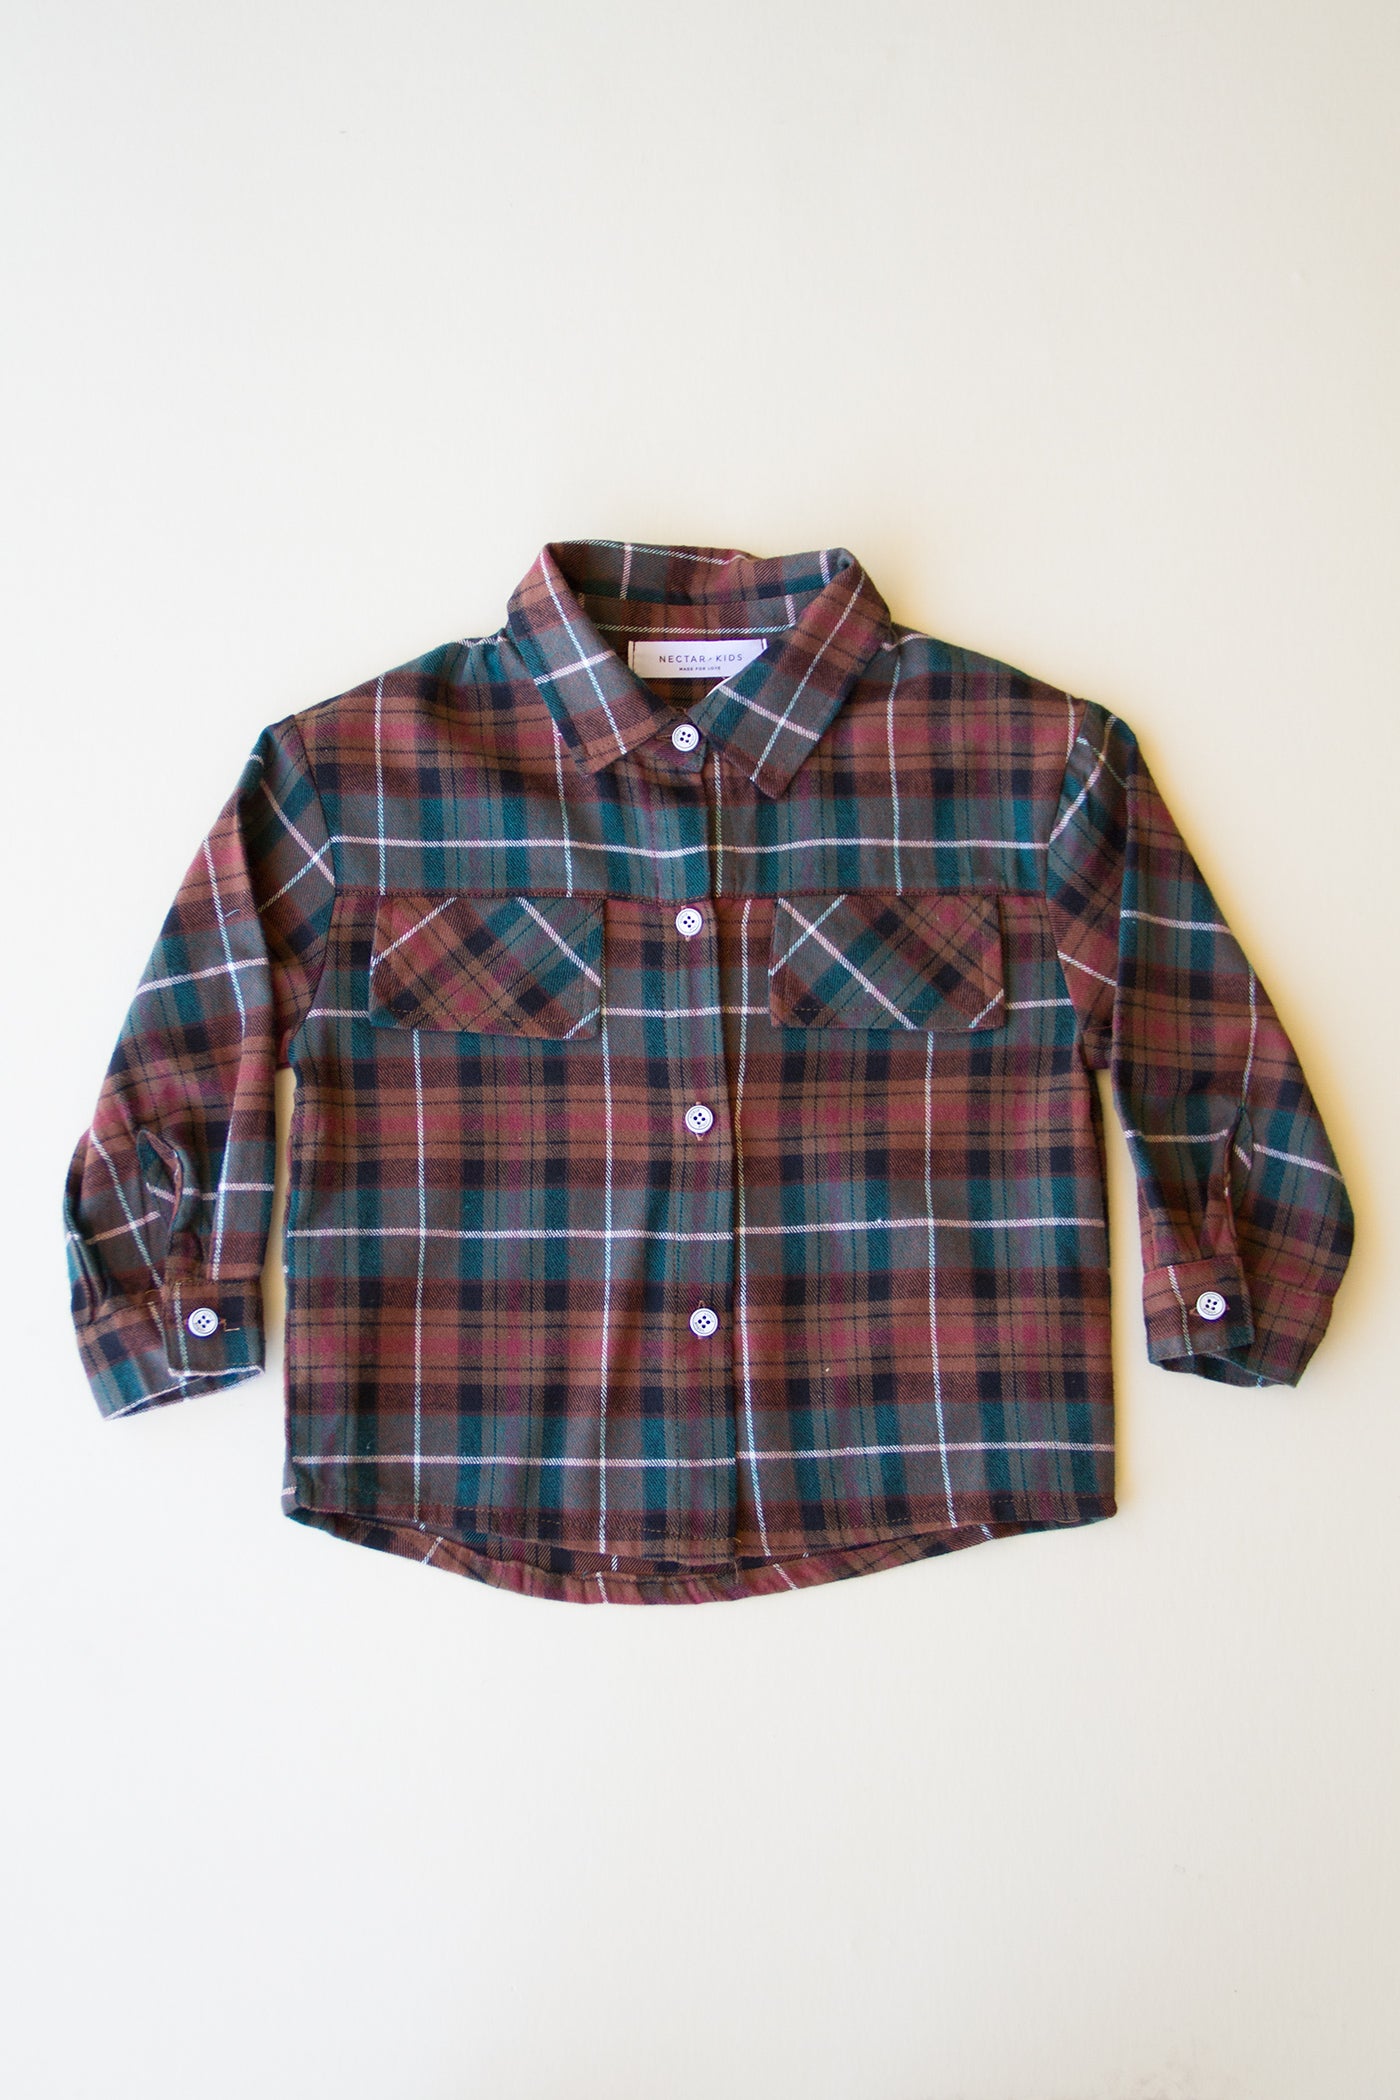 Long Sleeve Flannel Kids Top by Nectar Kids